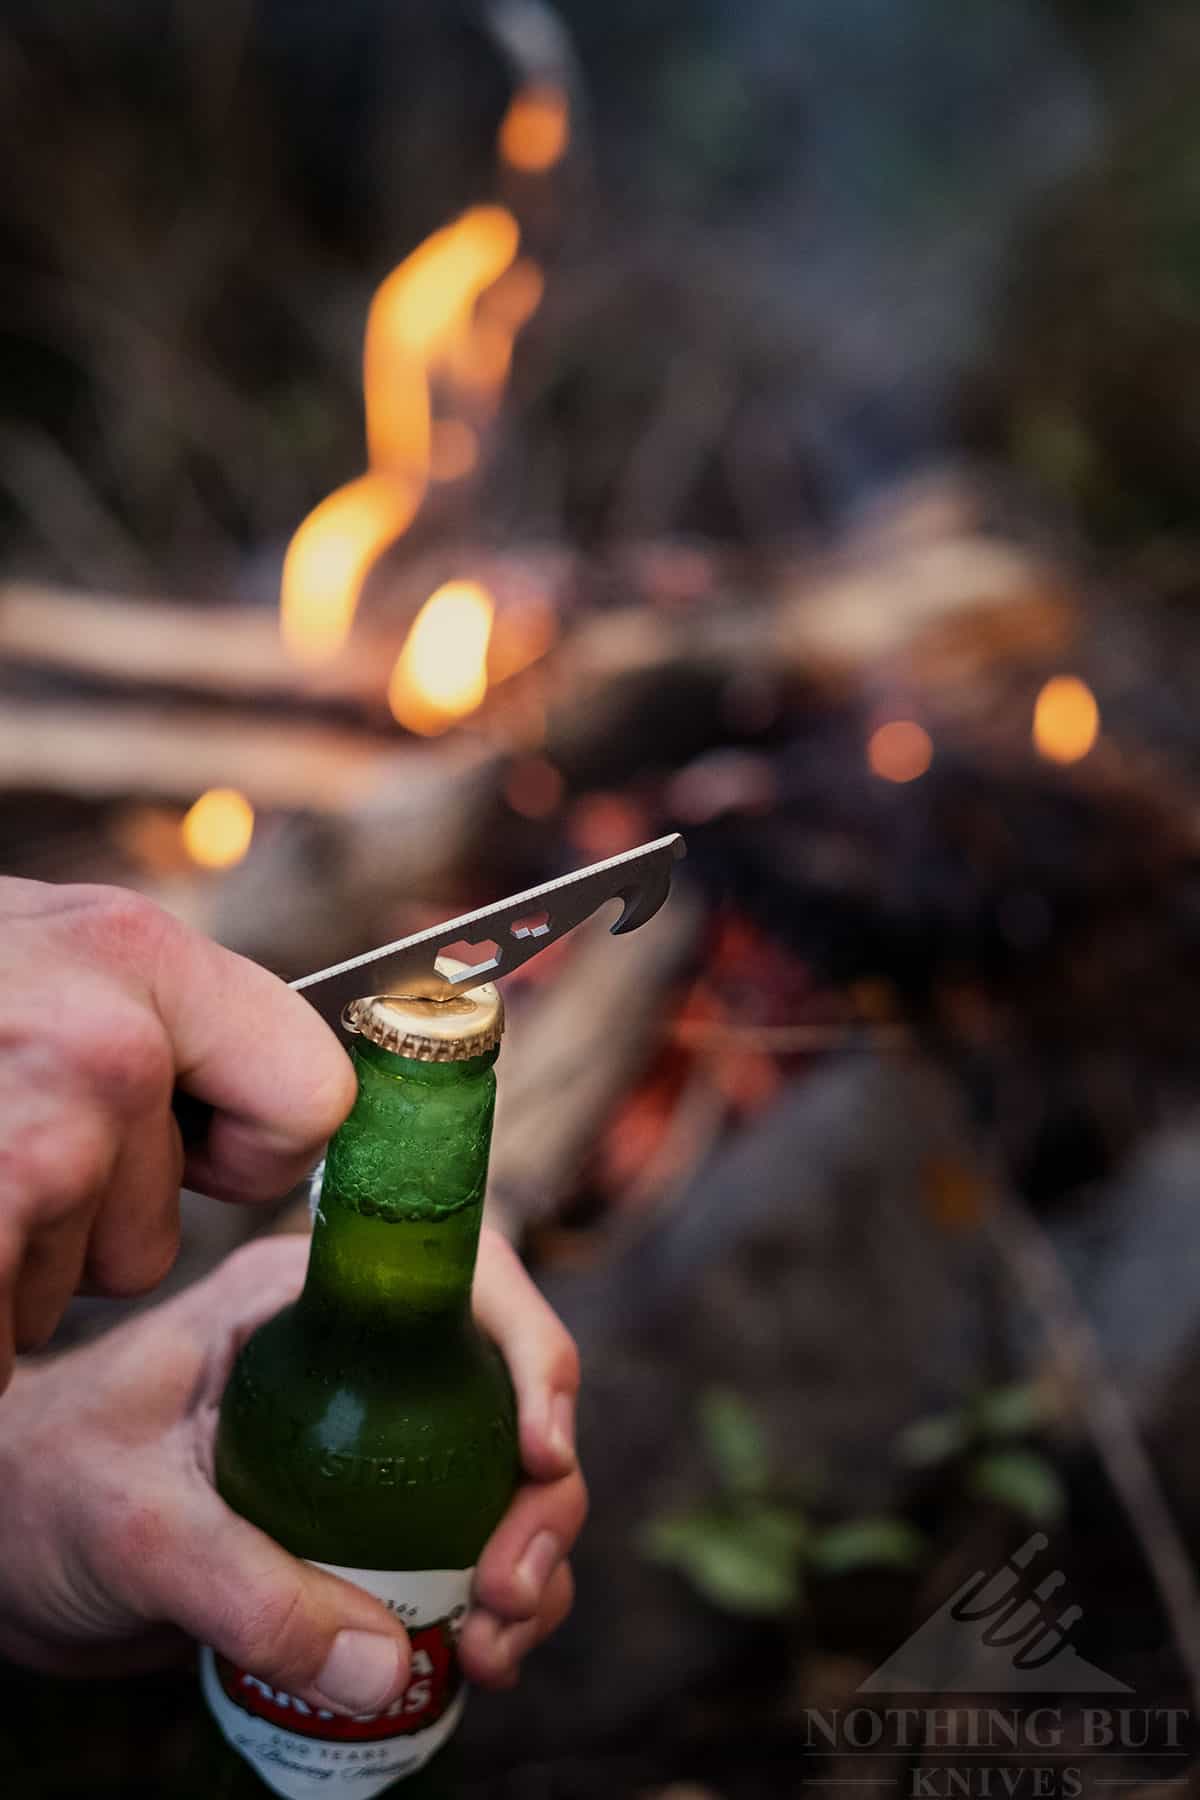 A beer bottle being opened with the Crit's tool bar by a campfire. This illustrates our favorite use of the Civivi Crit in this review. 